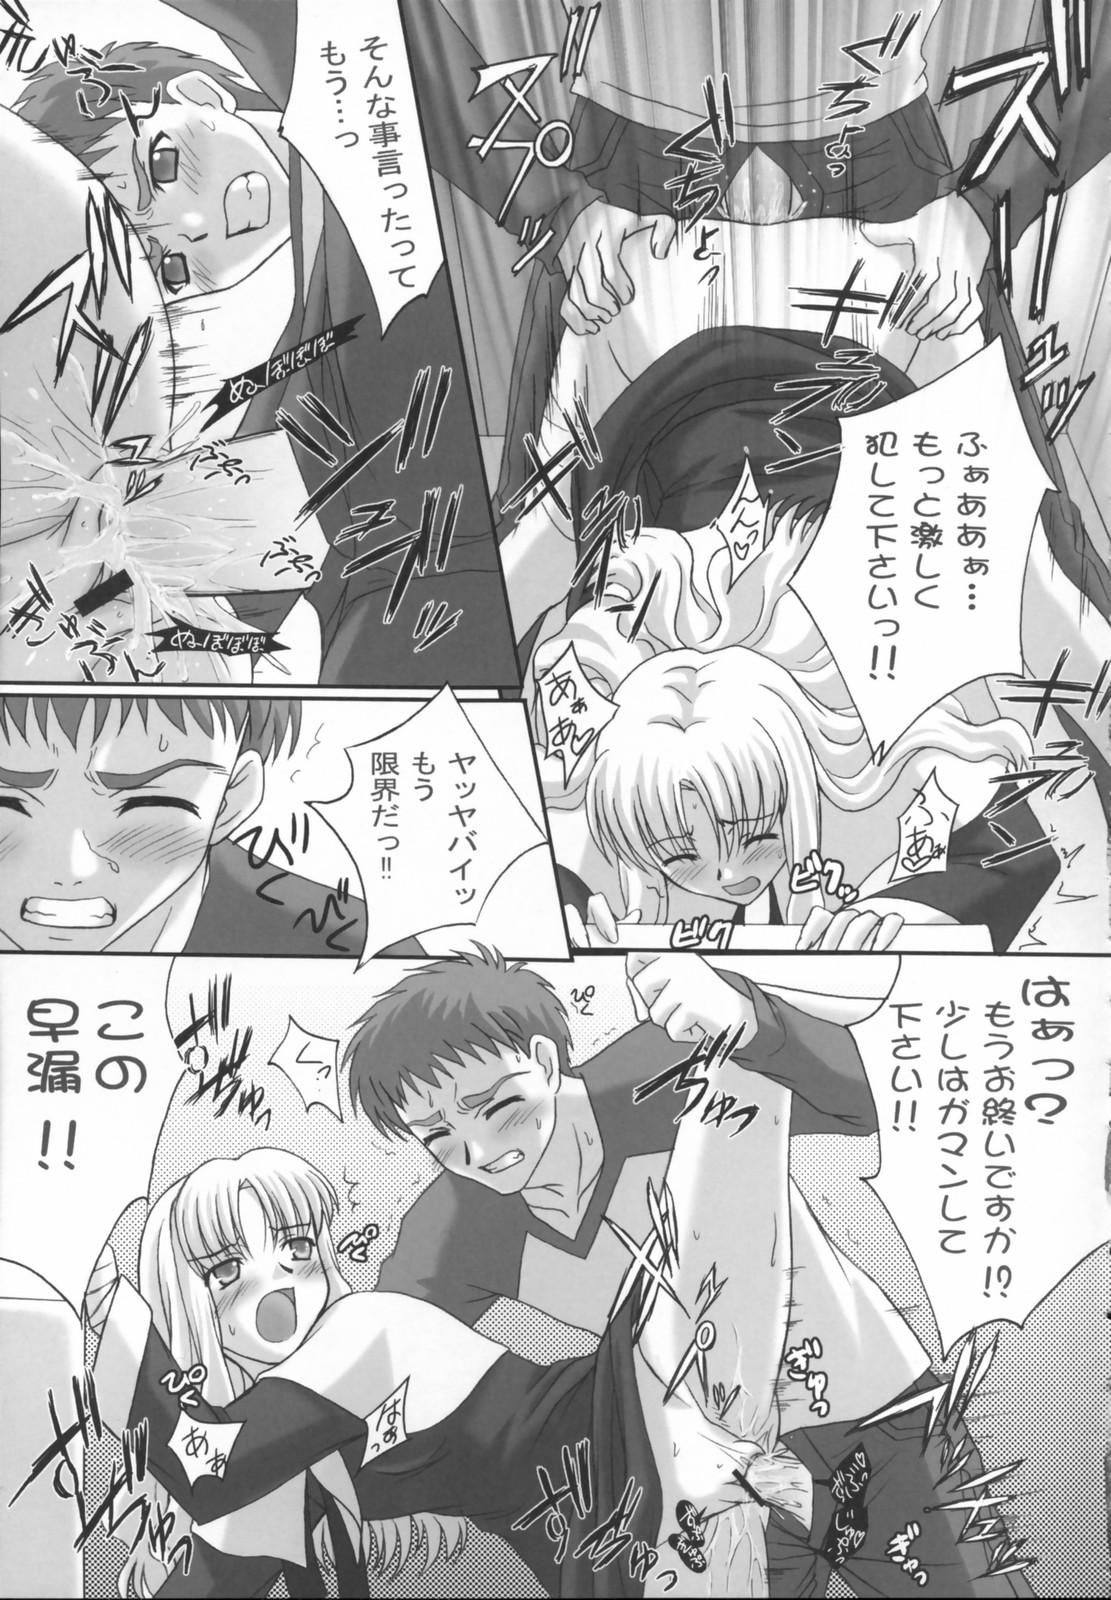 Mms Madness of sister - Fate hollow ataraxia Passion - Page 10